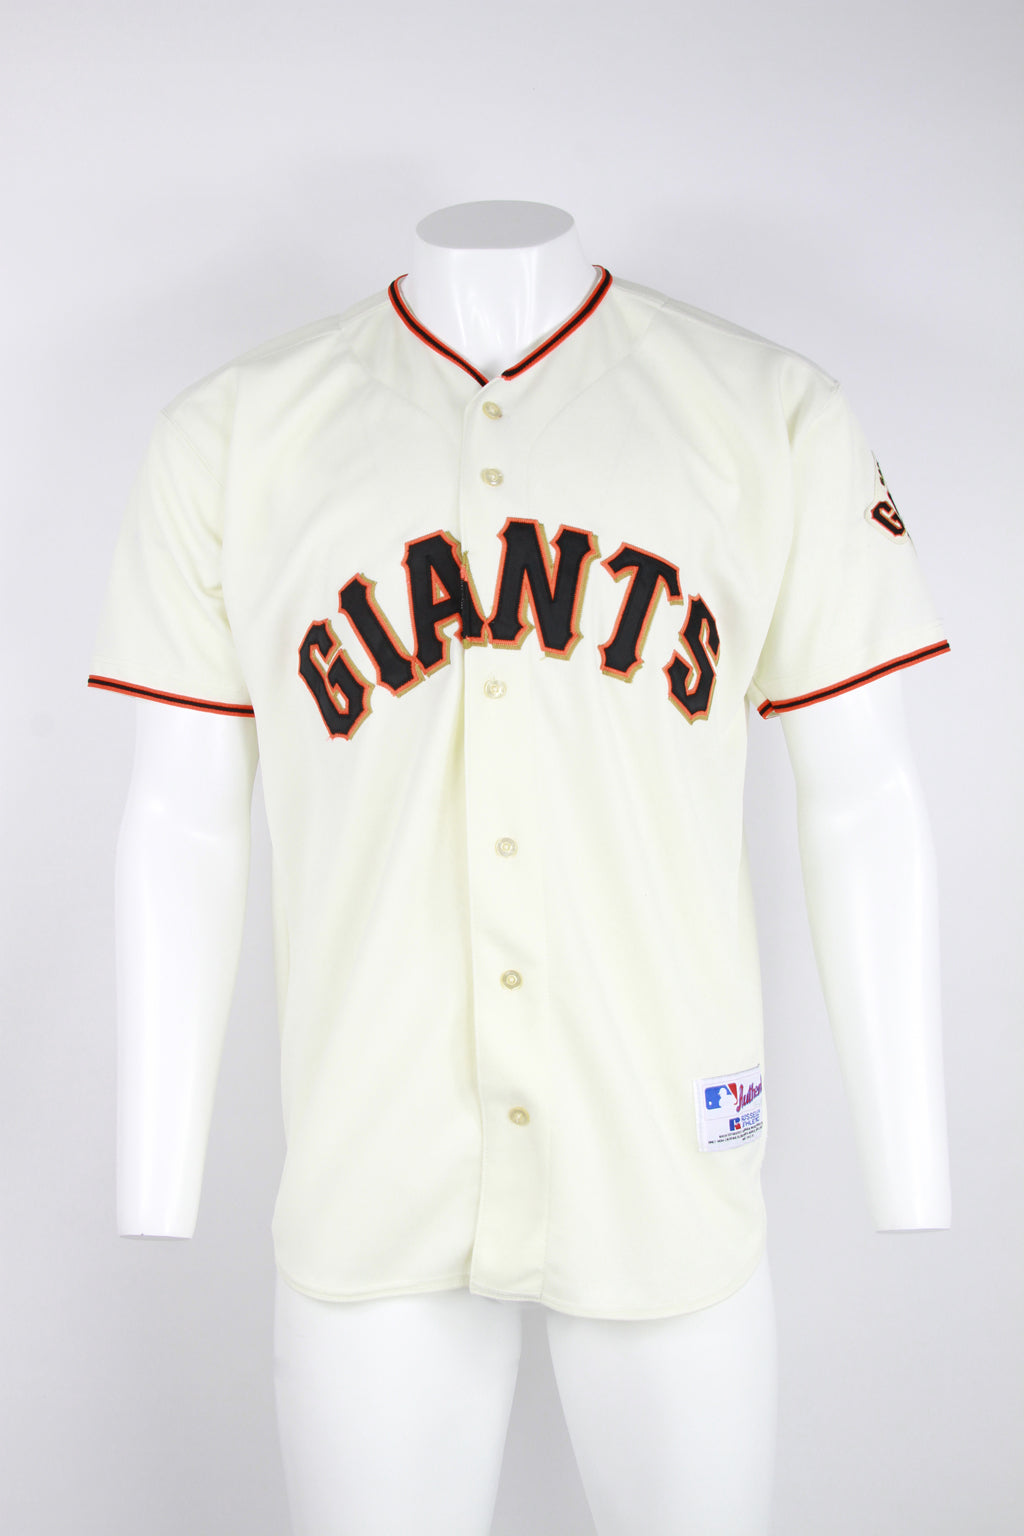 sf giants outfit